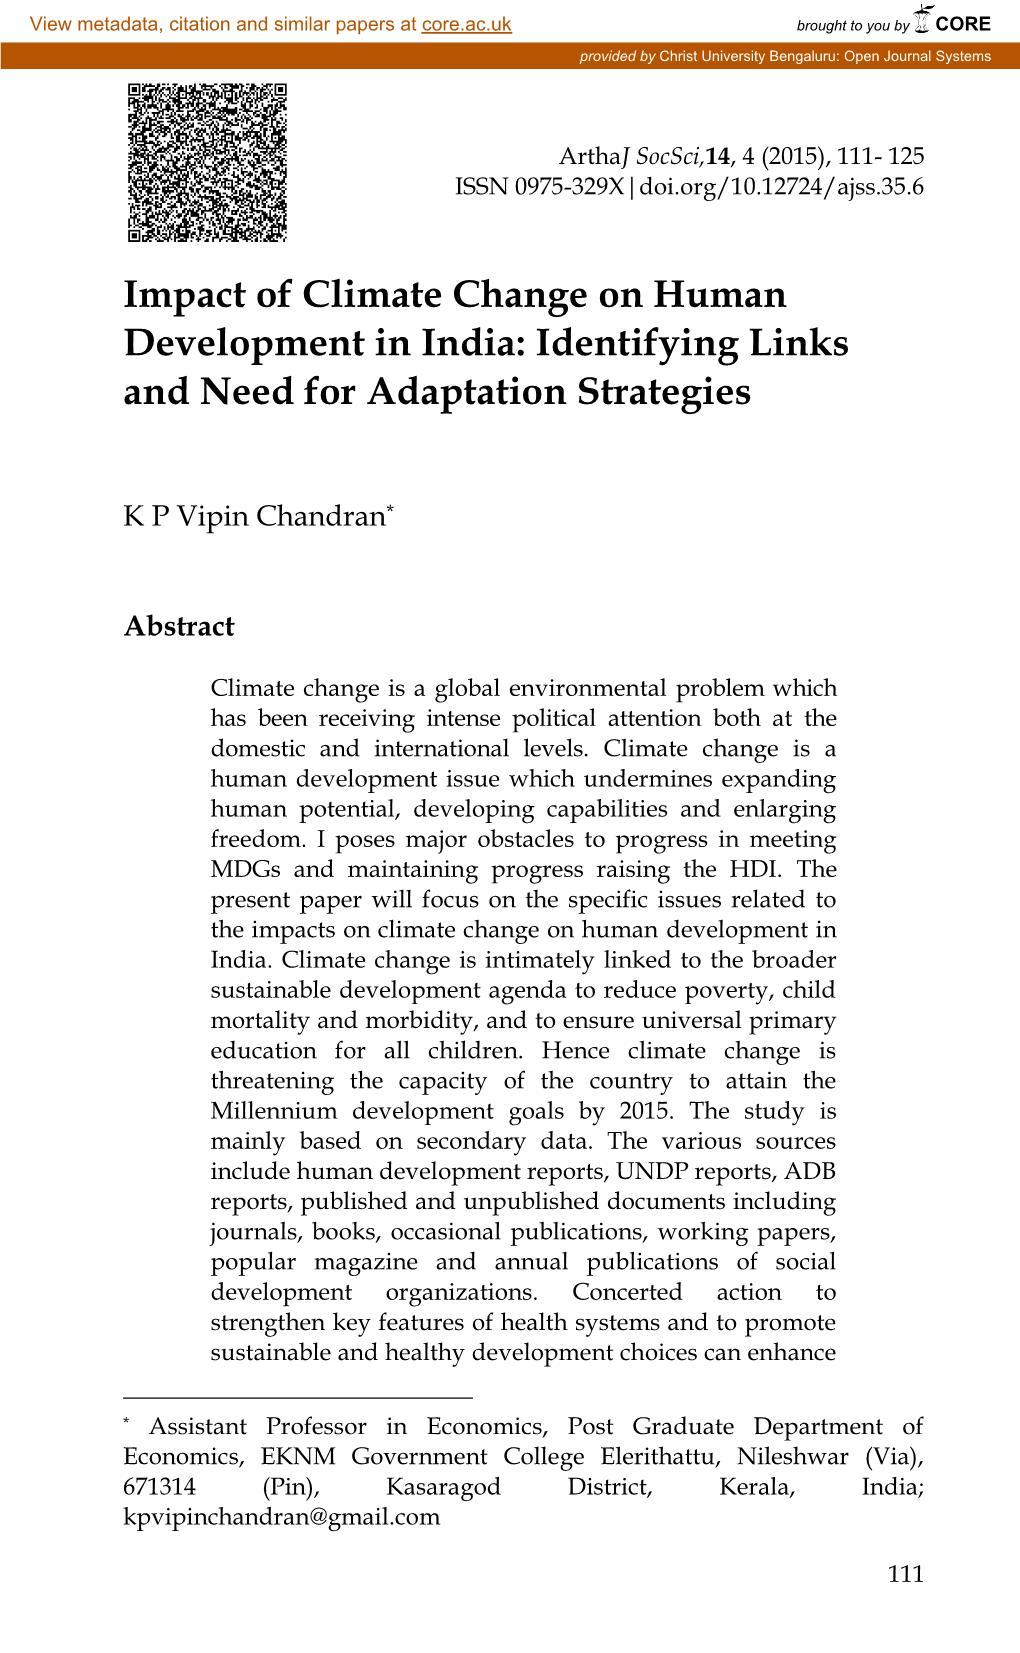 Impact of Climate Change on Human Development in India: Identifying Links and Need for Adaptation Strategies